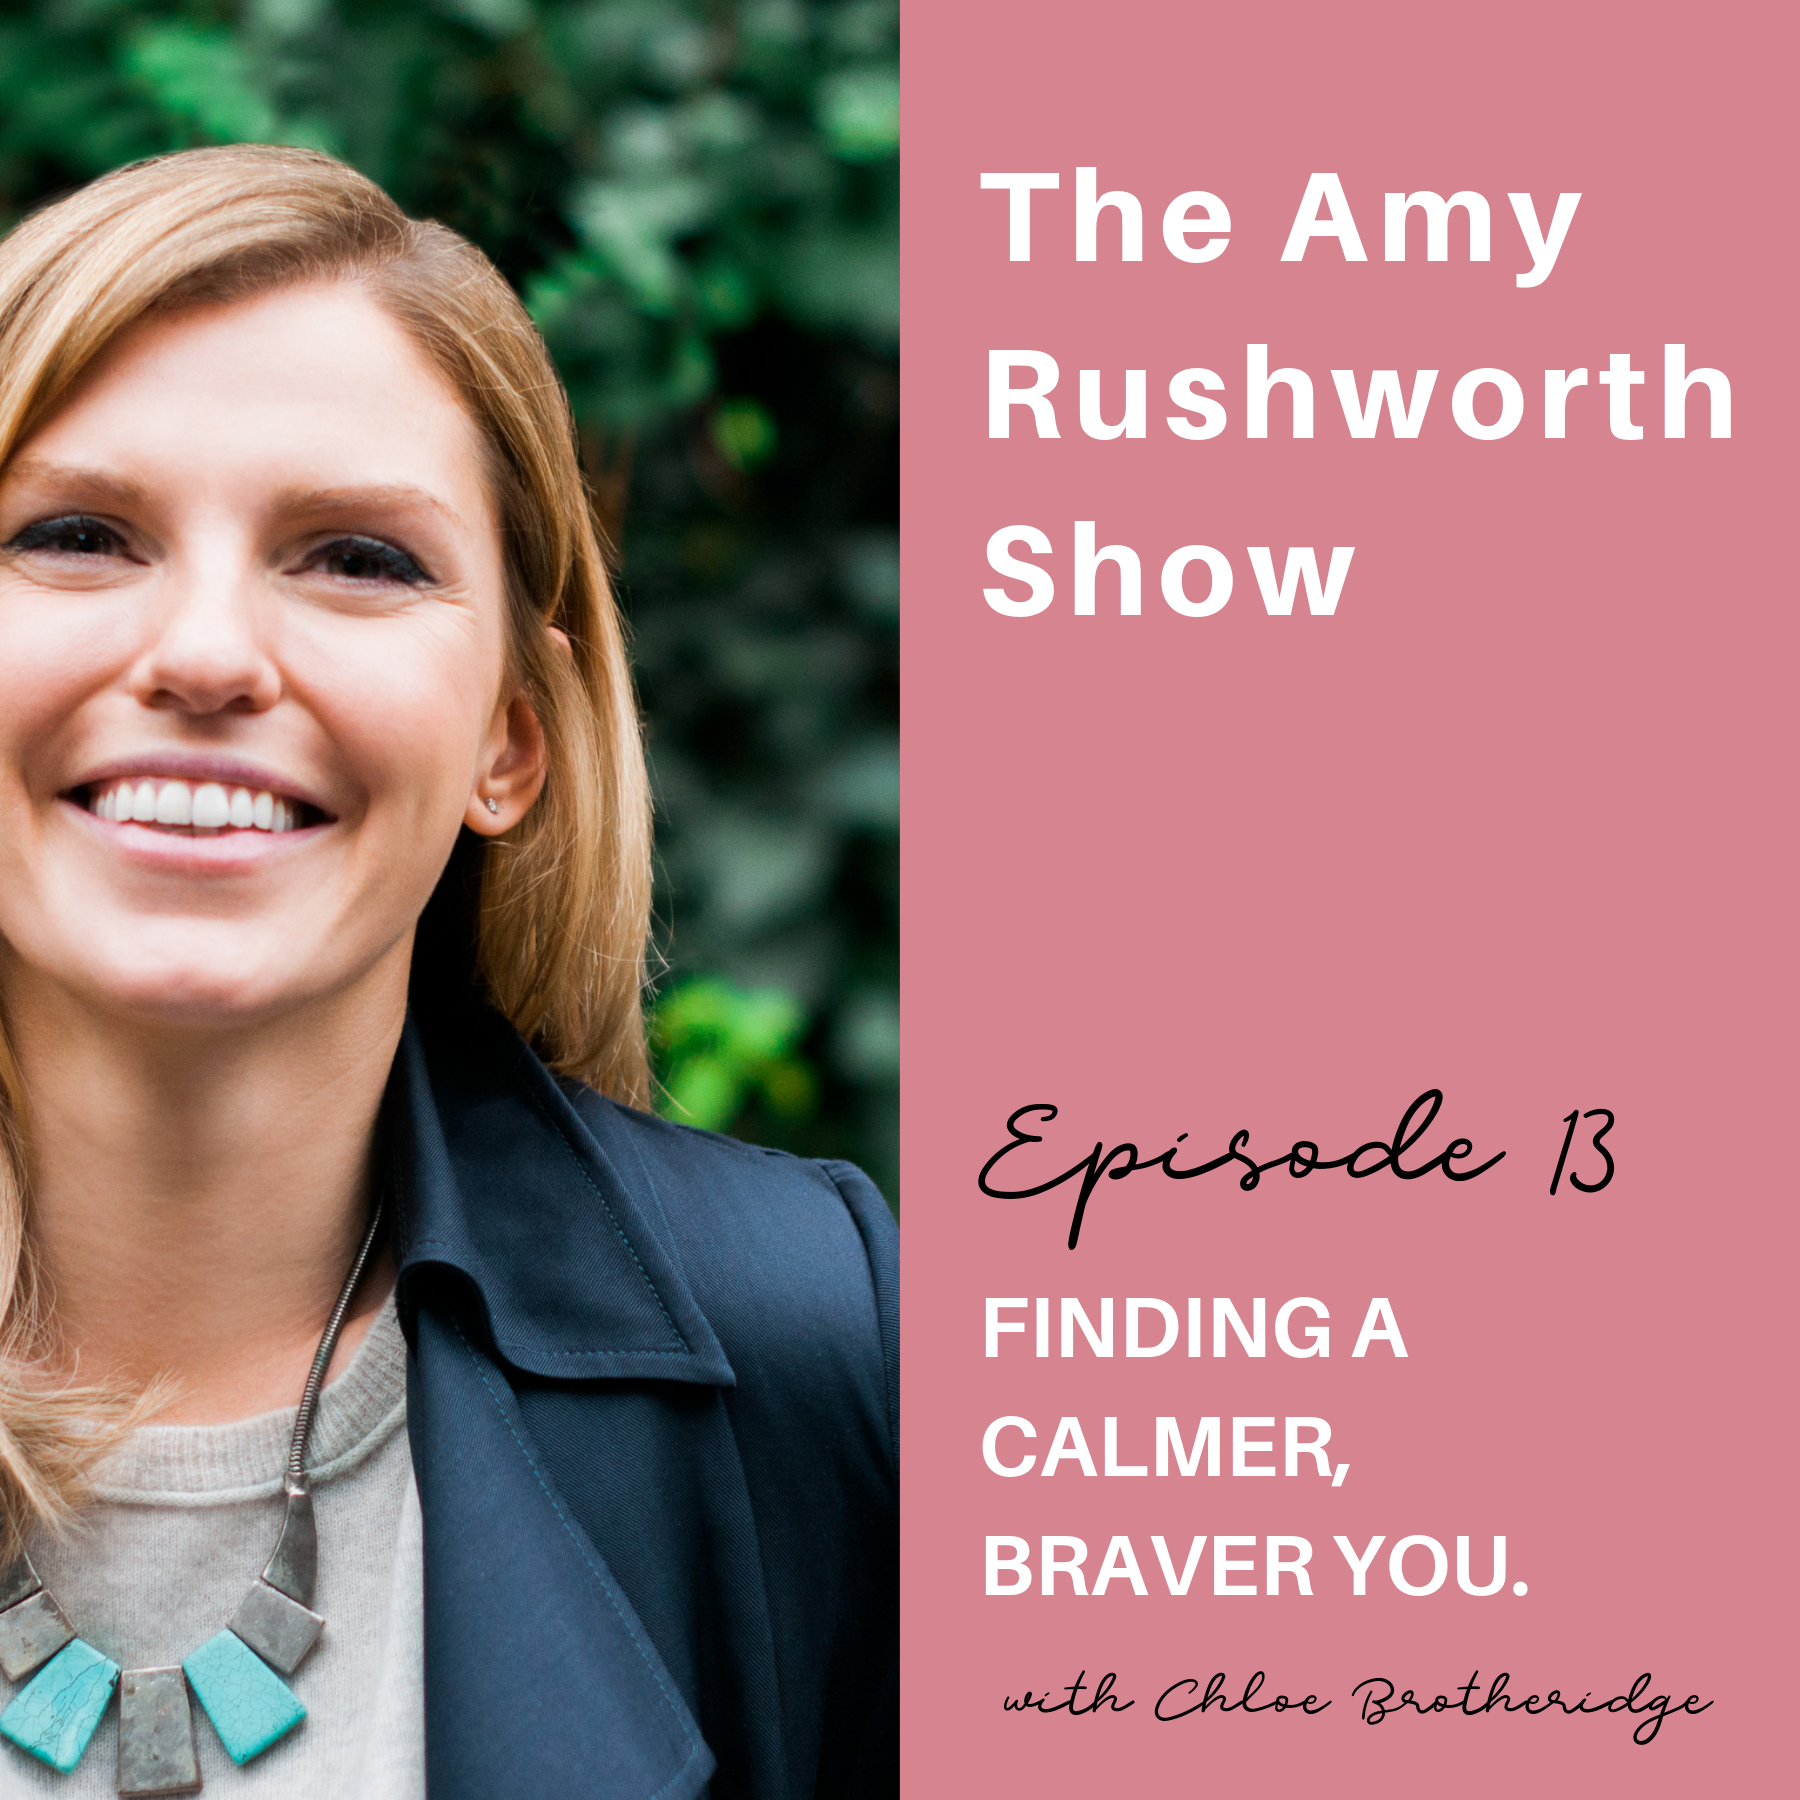 Episode 13: Finding a Calmer, Braver You with Chloe Brotheridge